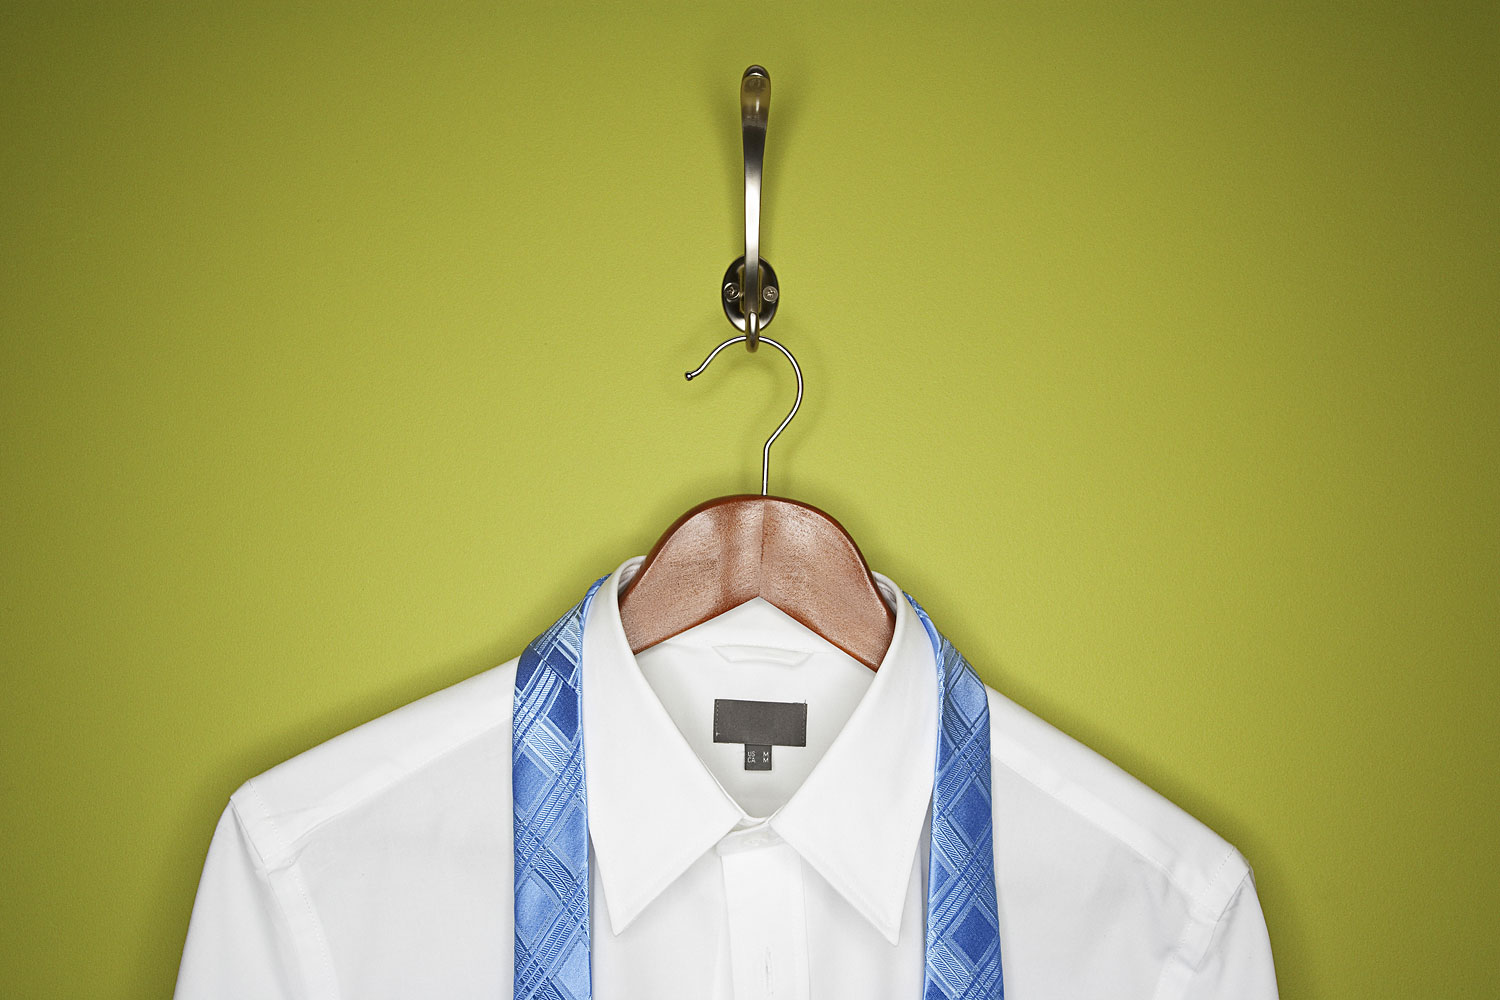 Stock image of a dress shirt and tie on hanger